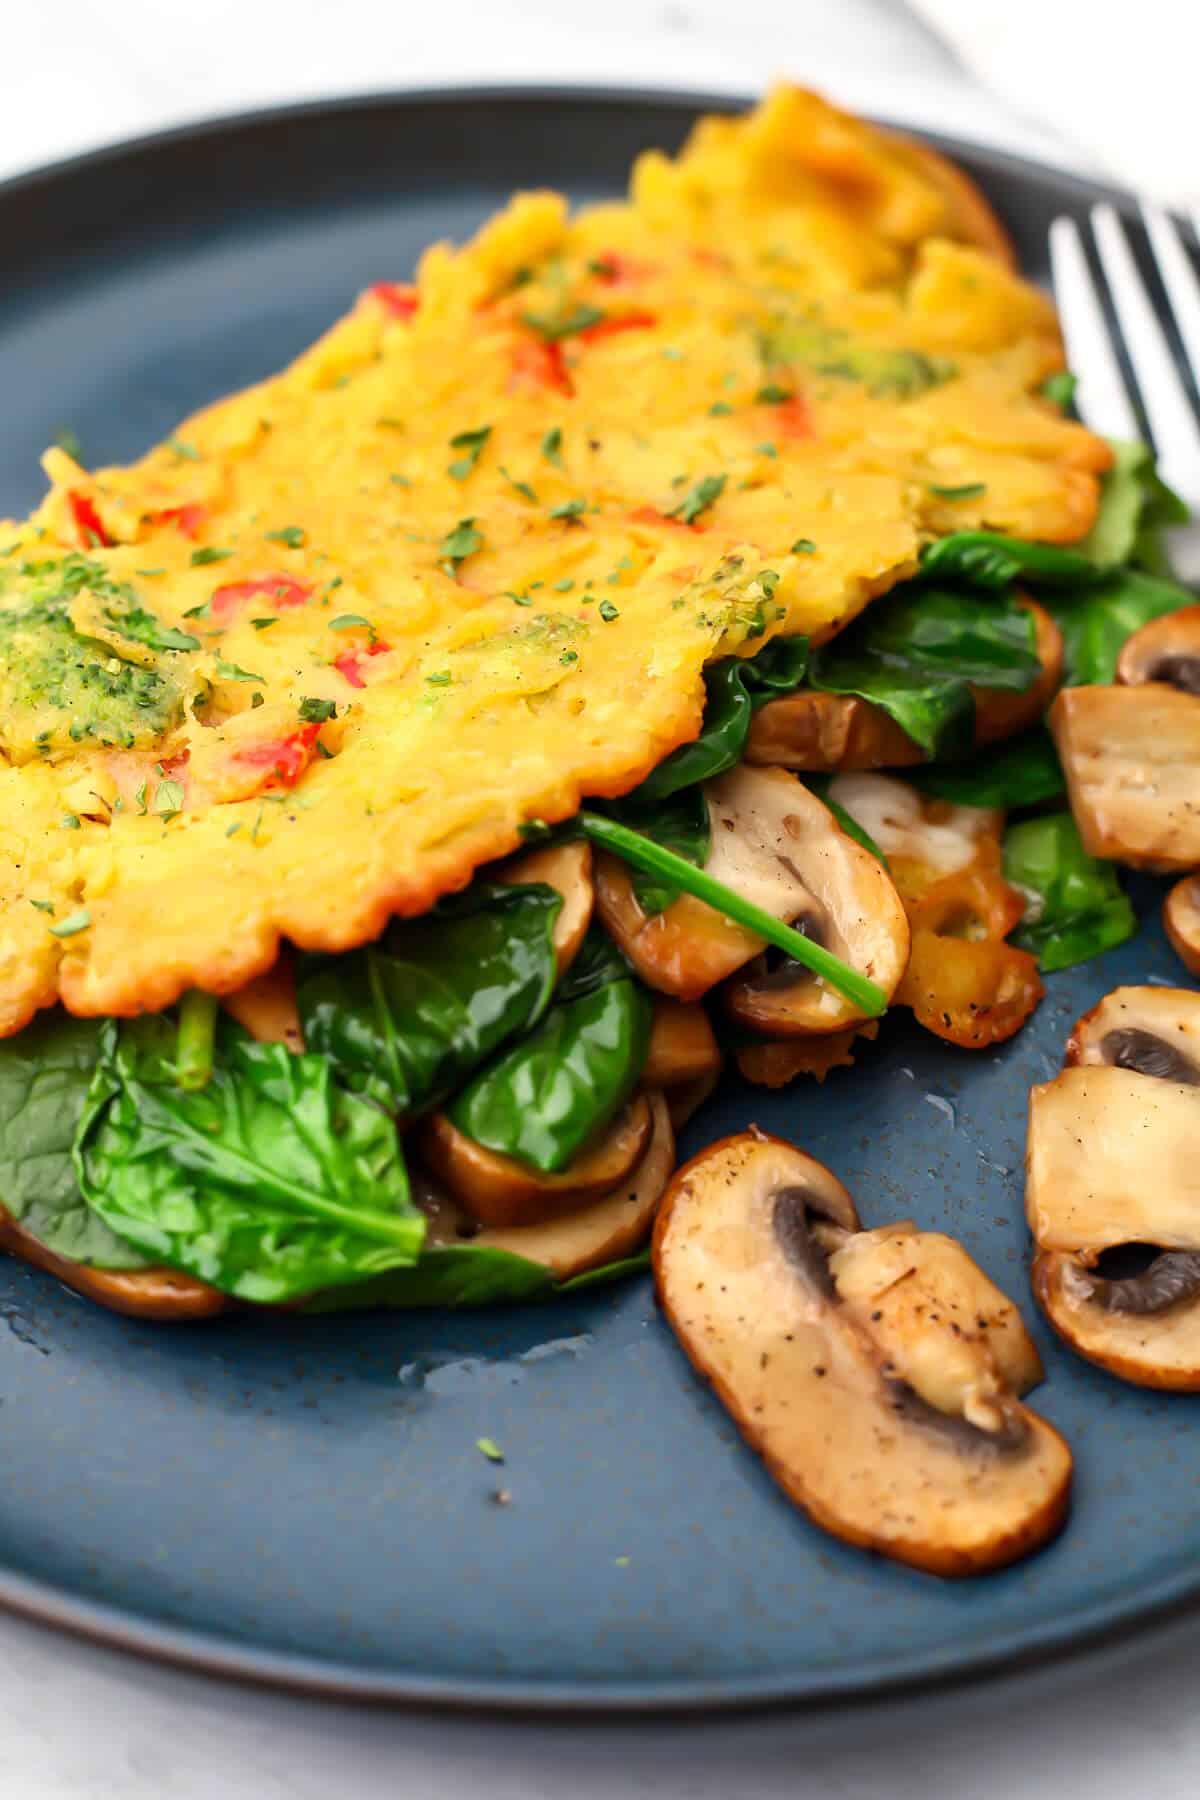 A vegan omelette made with chickpea flour and veggies, filled with vegan cheese, spinach ,and mushrooms.